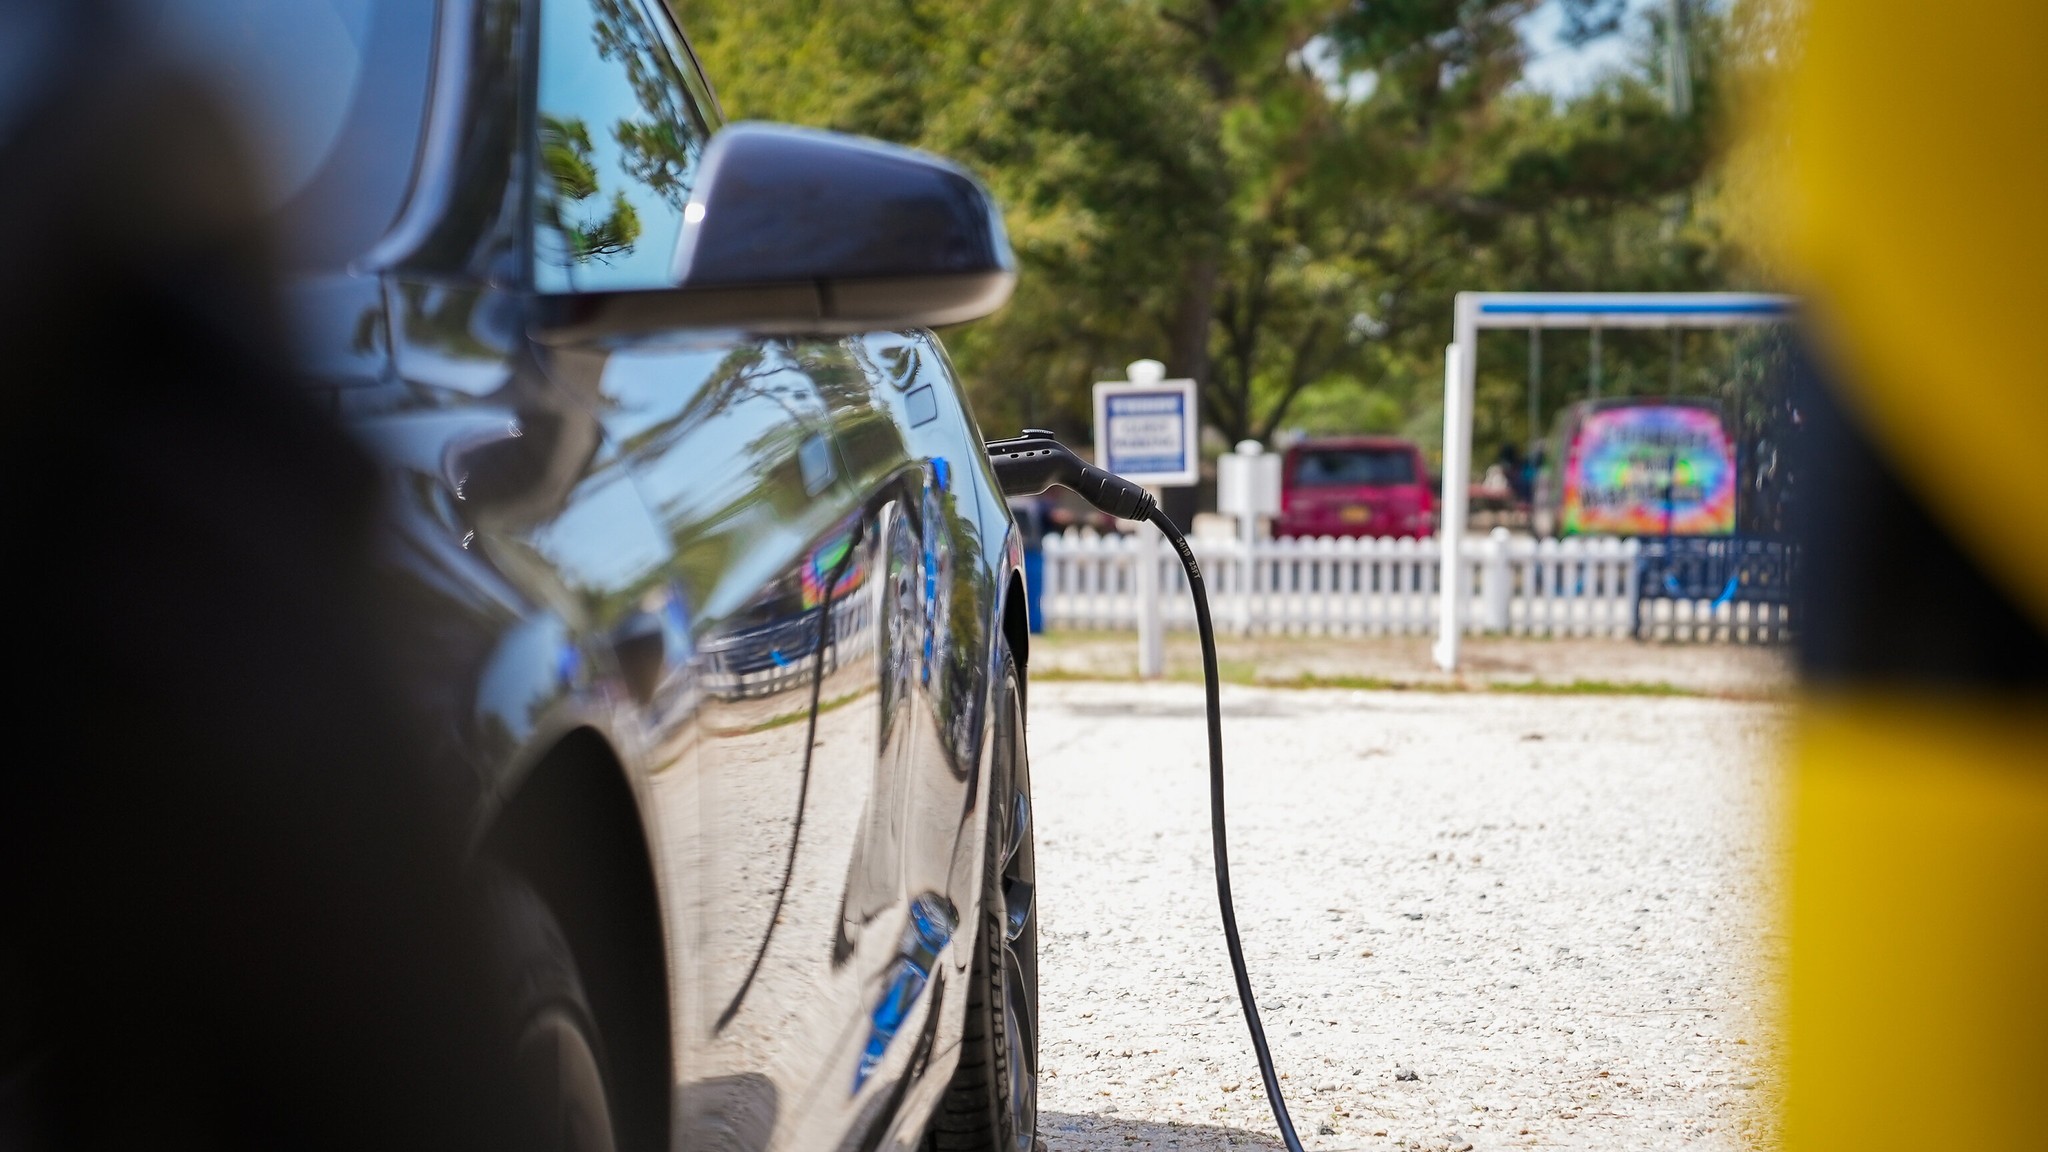 New survey details benefits, challenges for travelers using electric vehicles